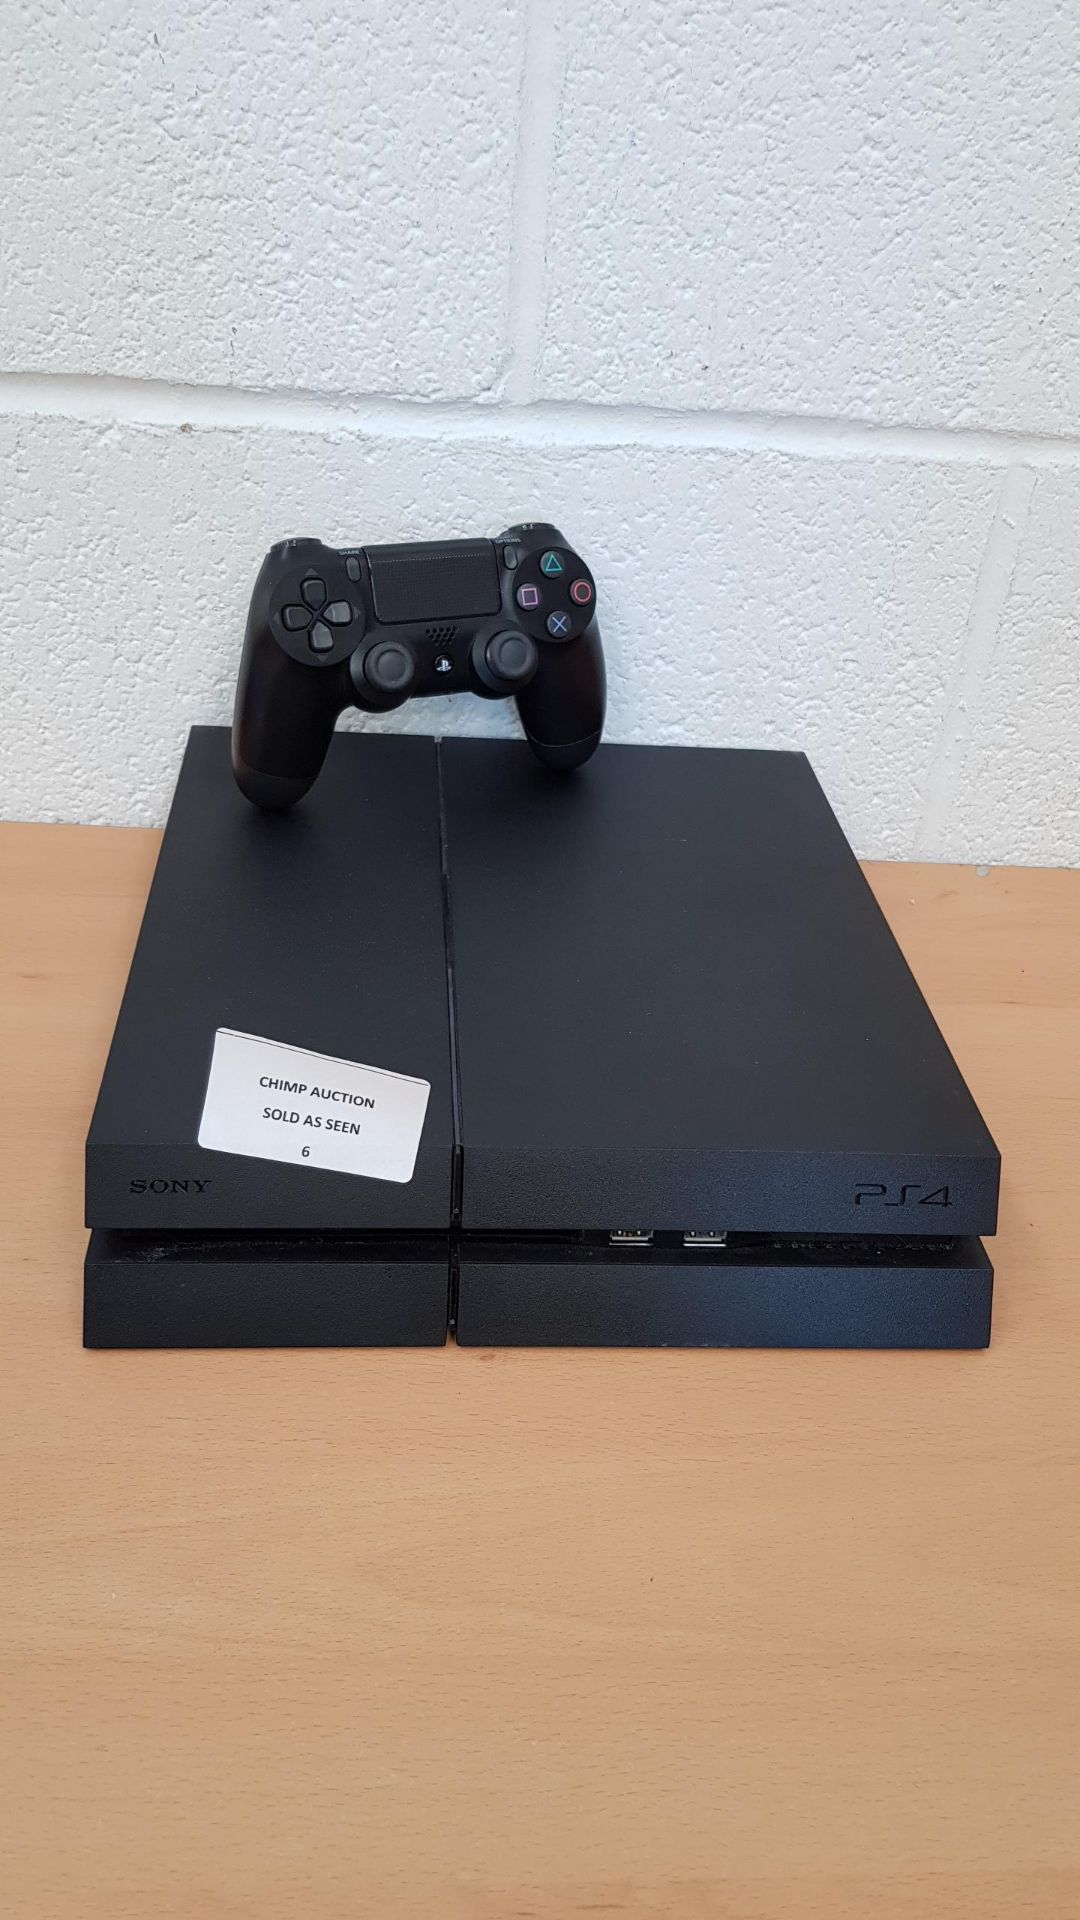 Sony Playstation 4 console 1TB Edition RRP £379.99.